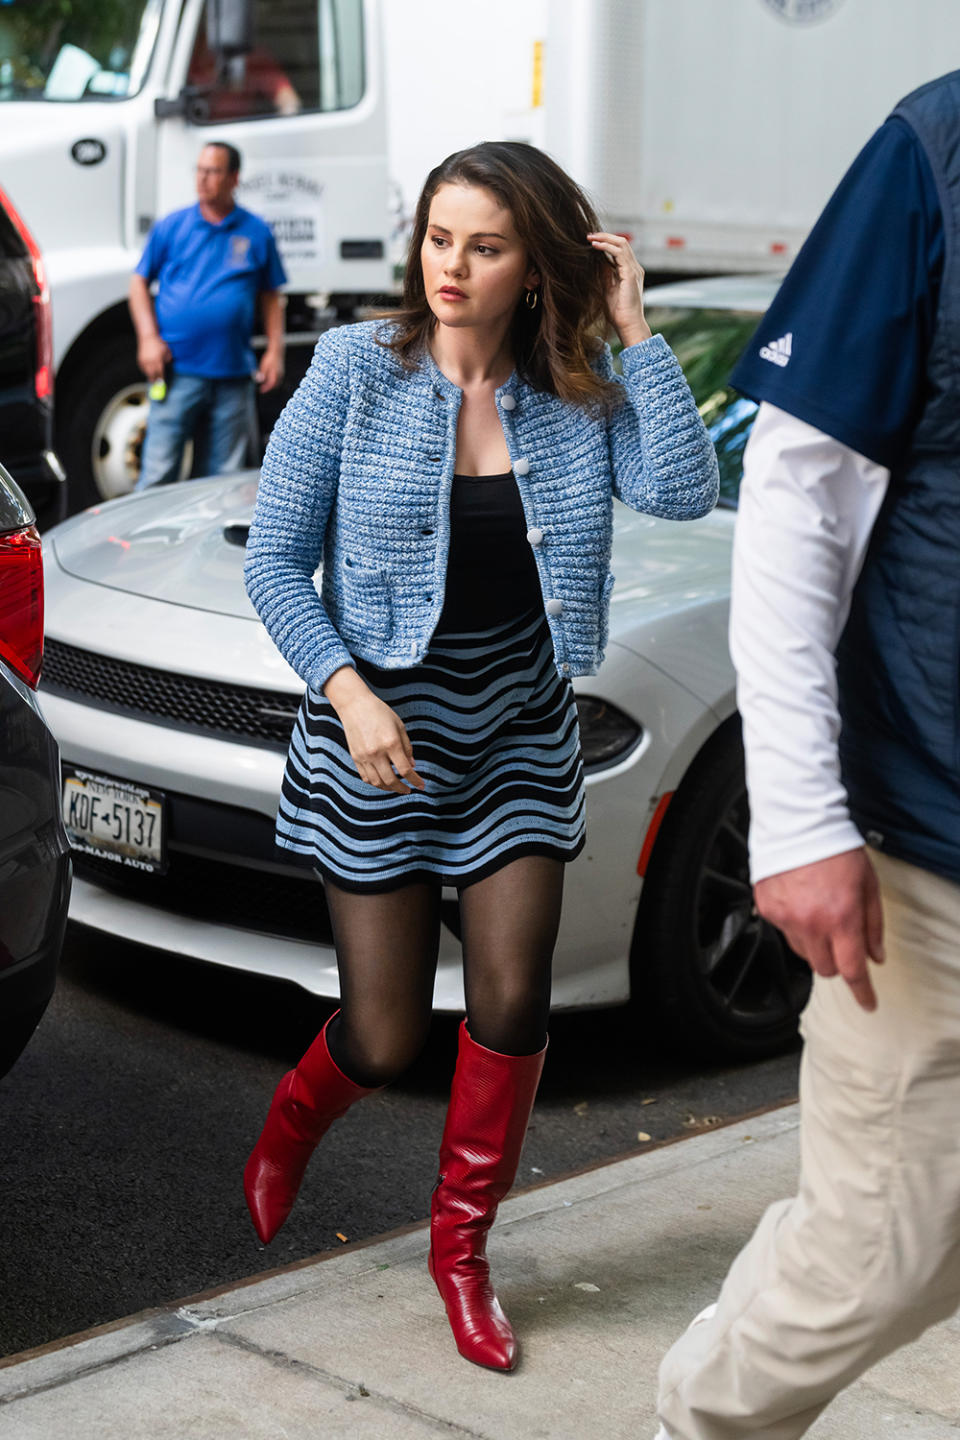 Selena Gomez filming "Only Murders in the Building" on May 29 in New York, Missoni